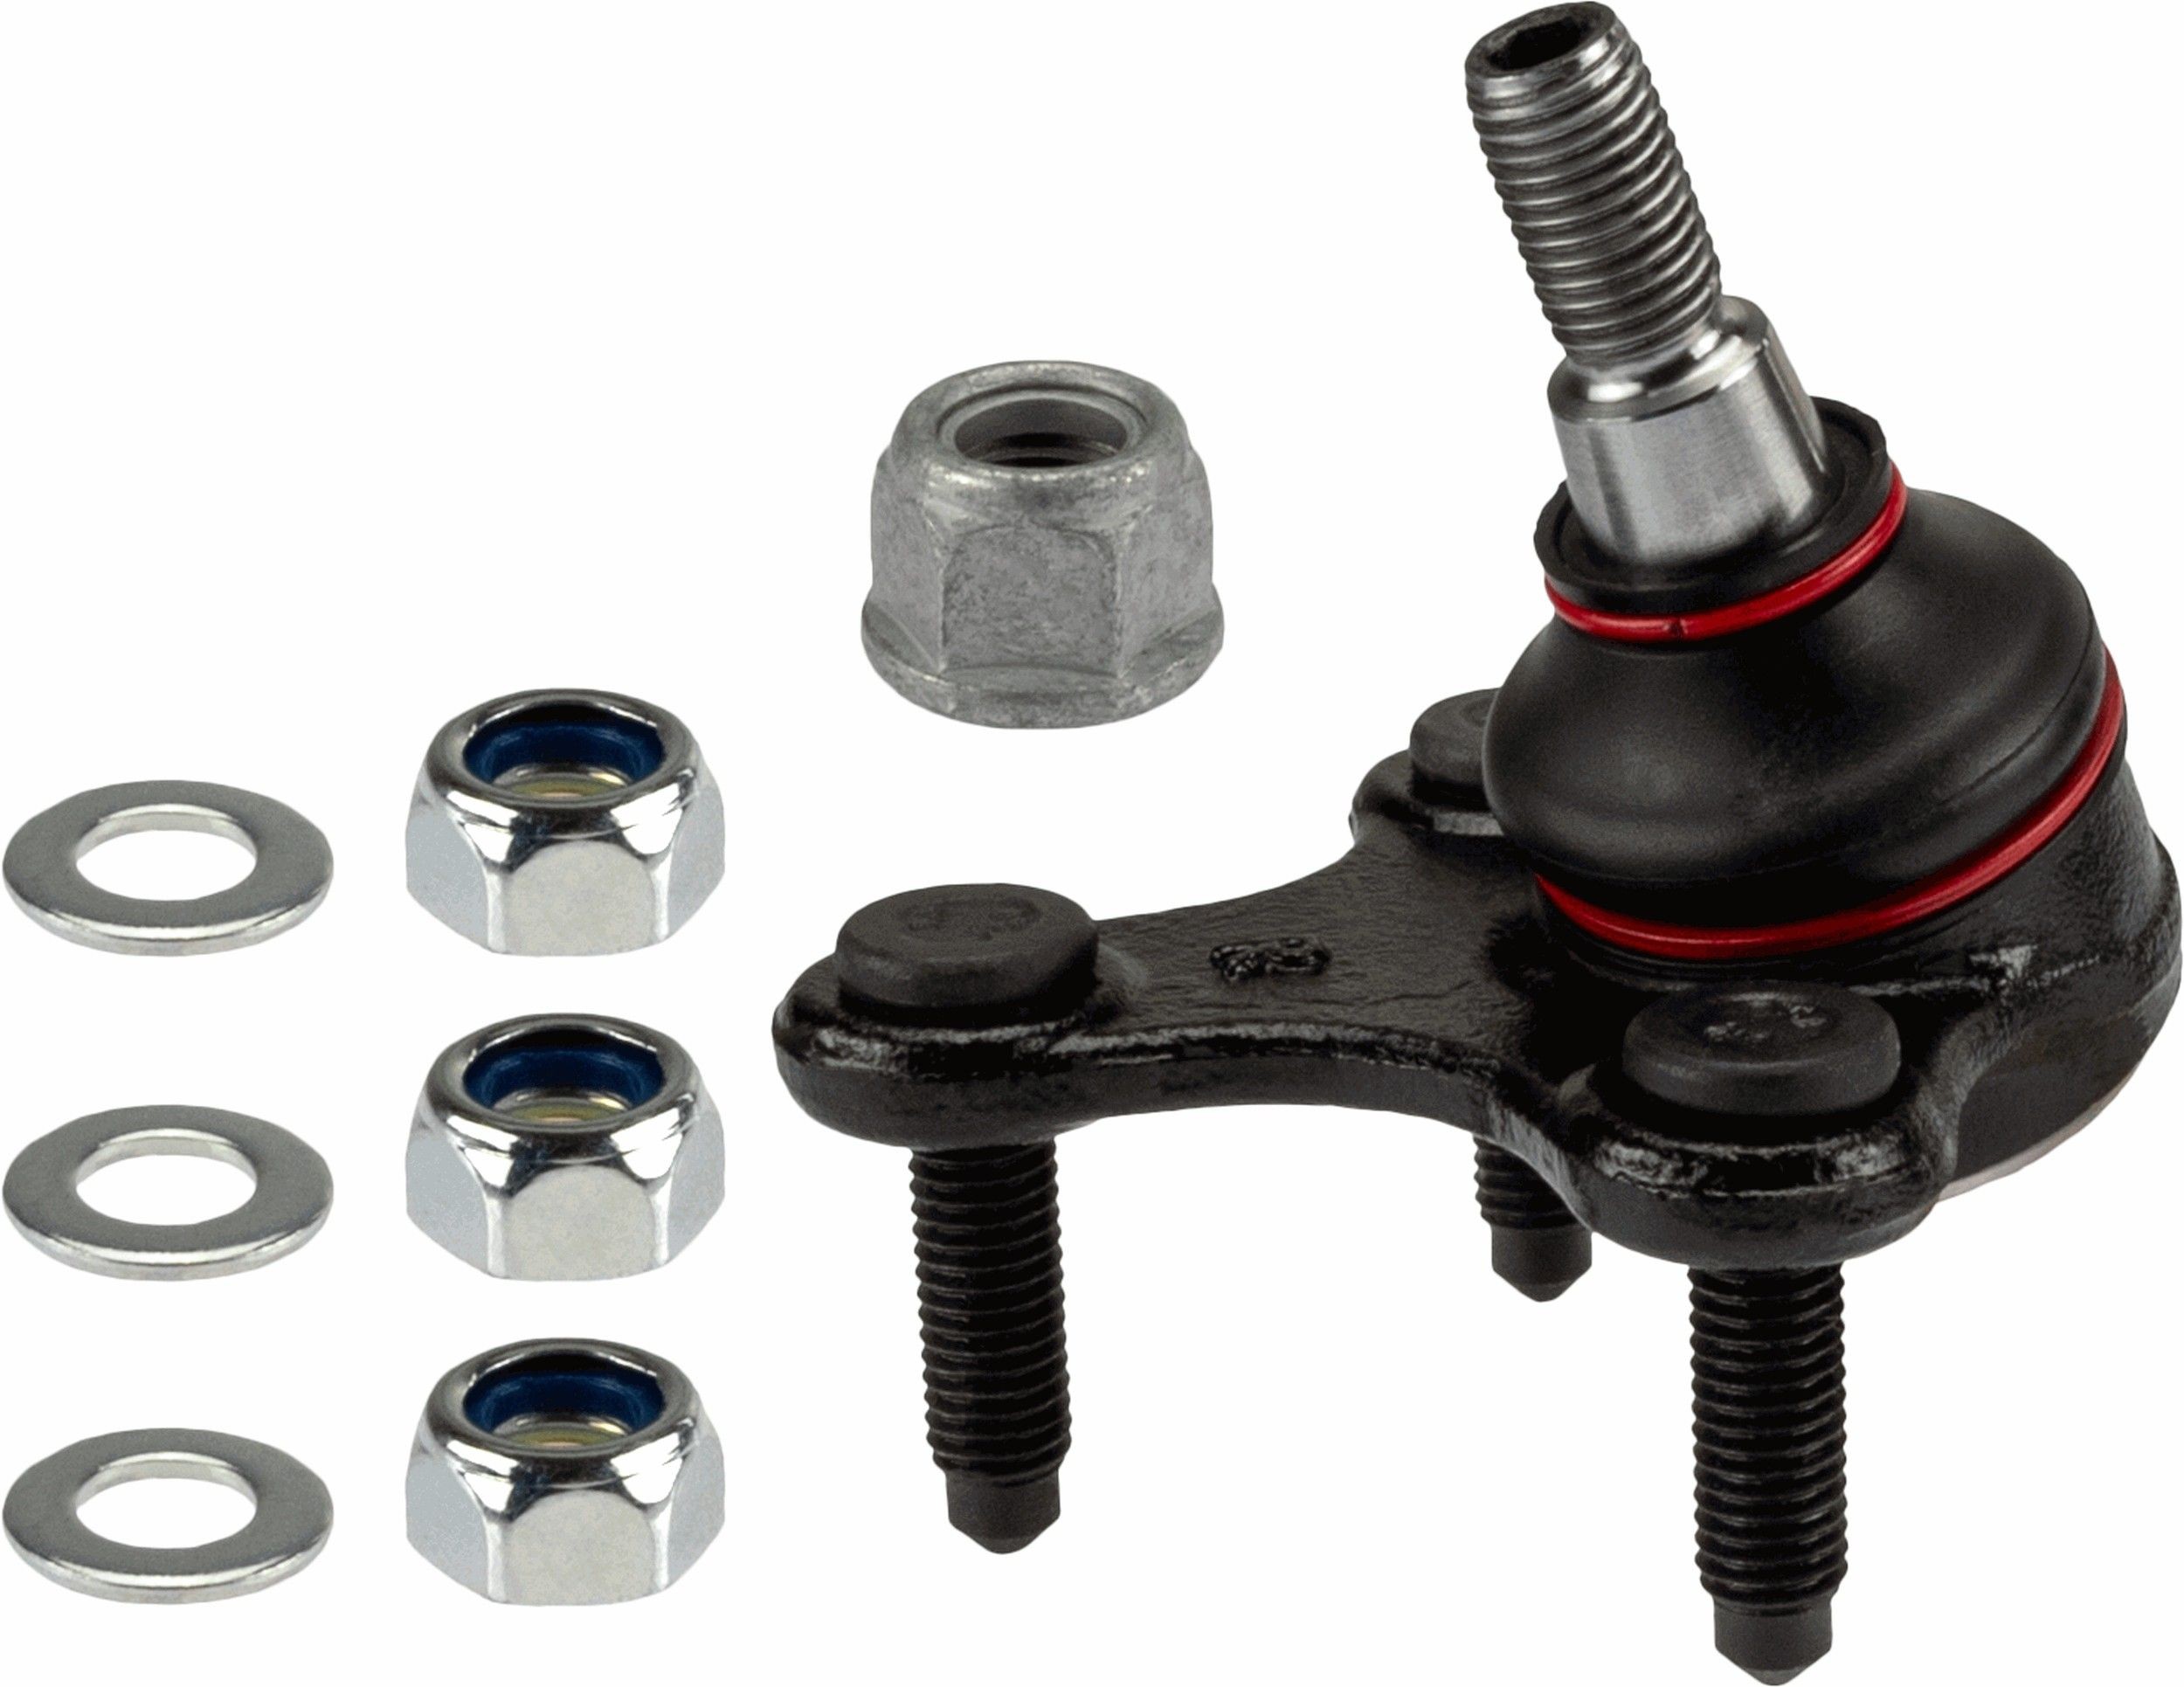 TRW JBJ752 Ball Joint with accessories, 19mm, 1:5